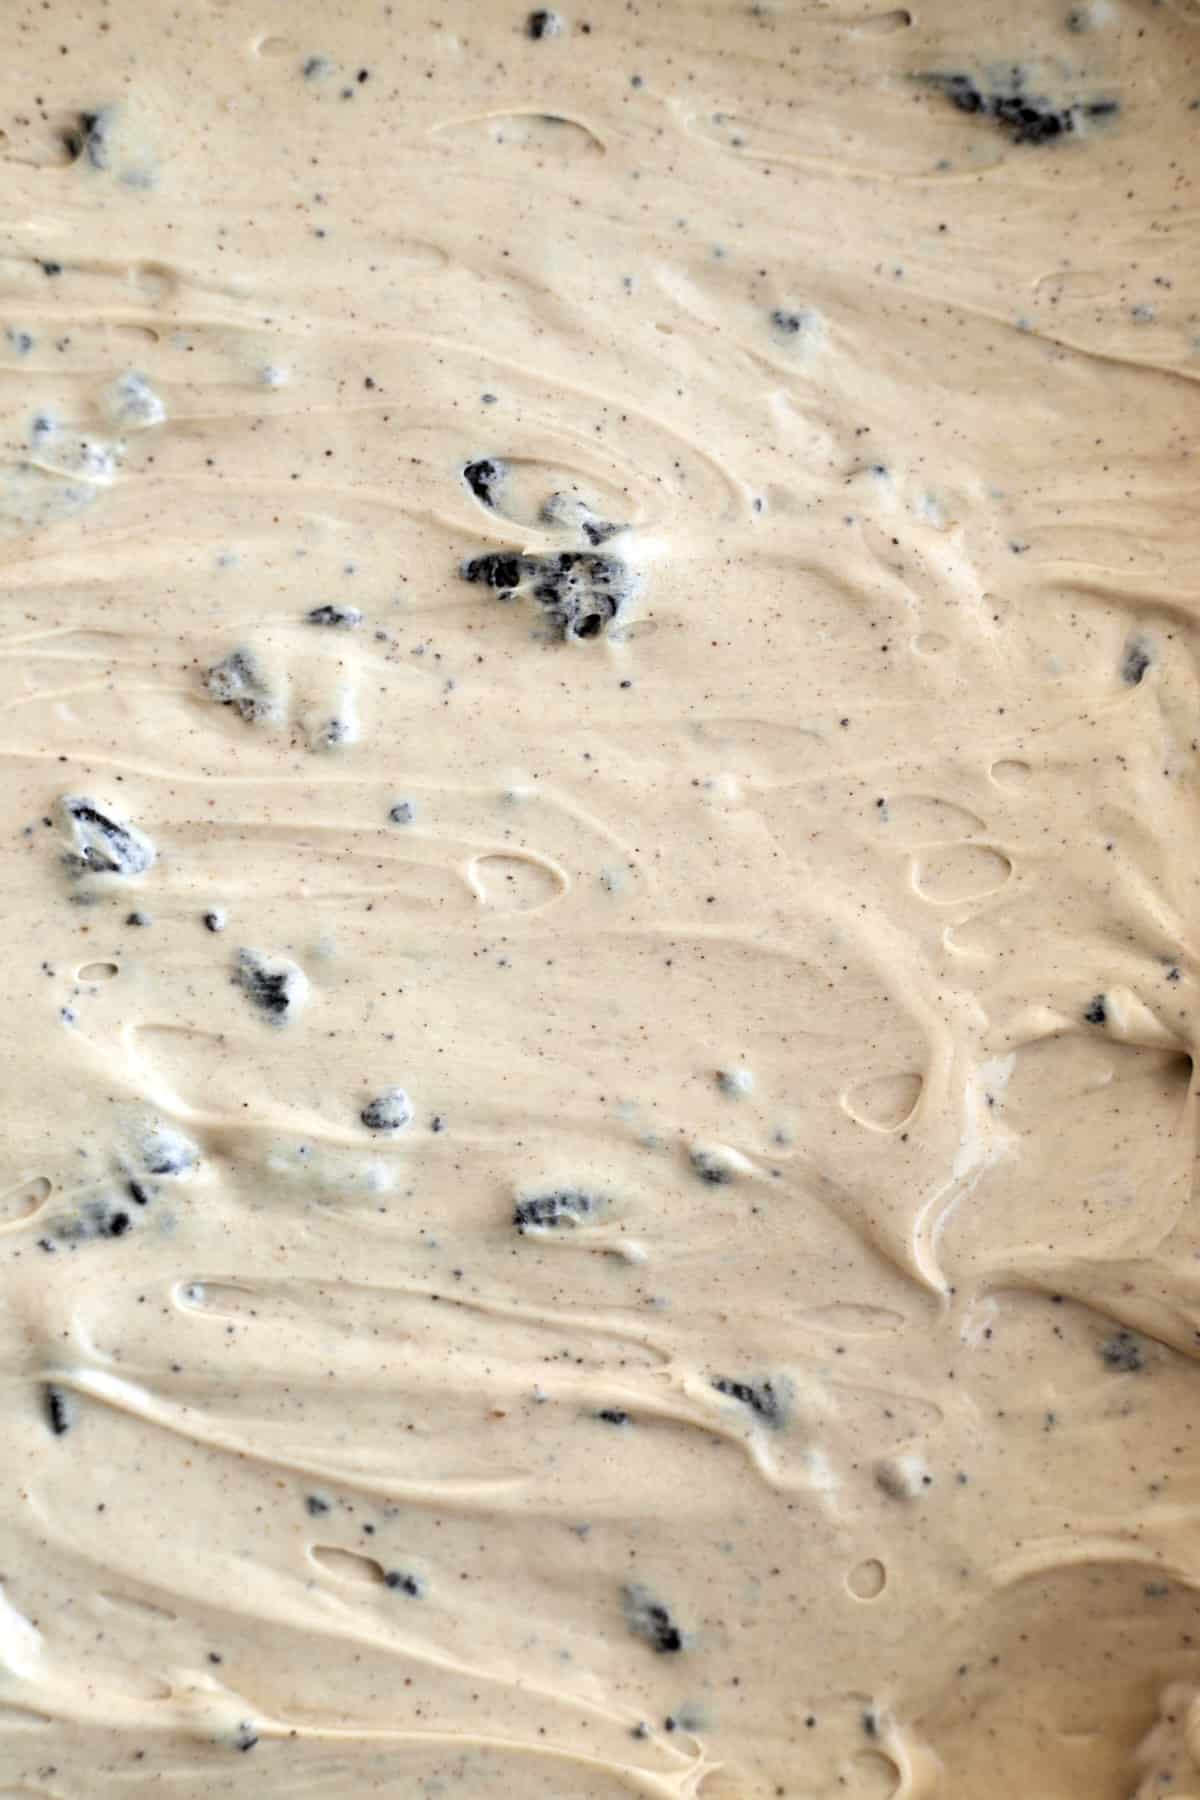 cream cheese, whipped topping mixture with Oreo pieces